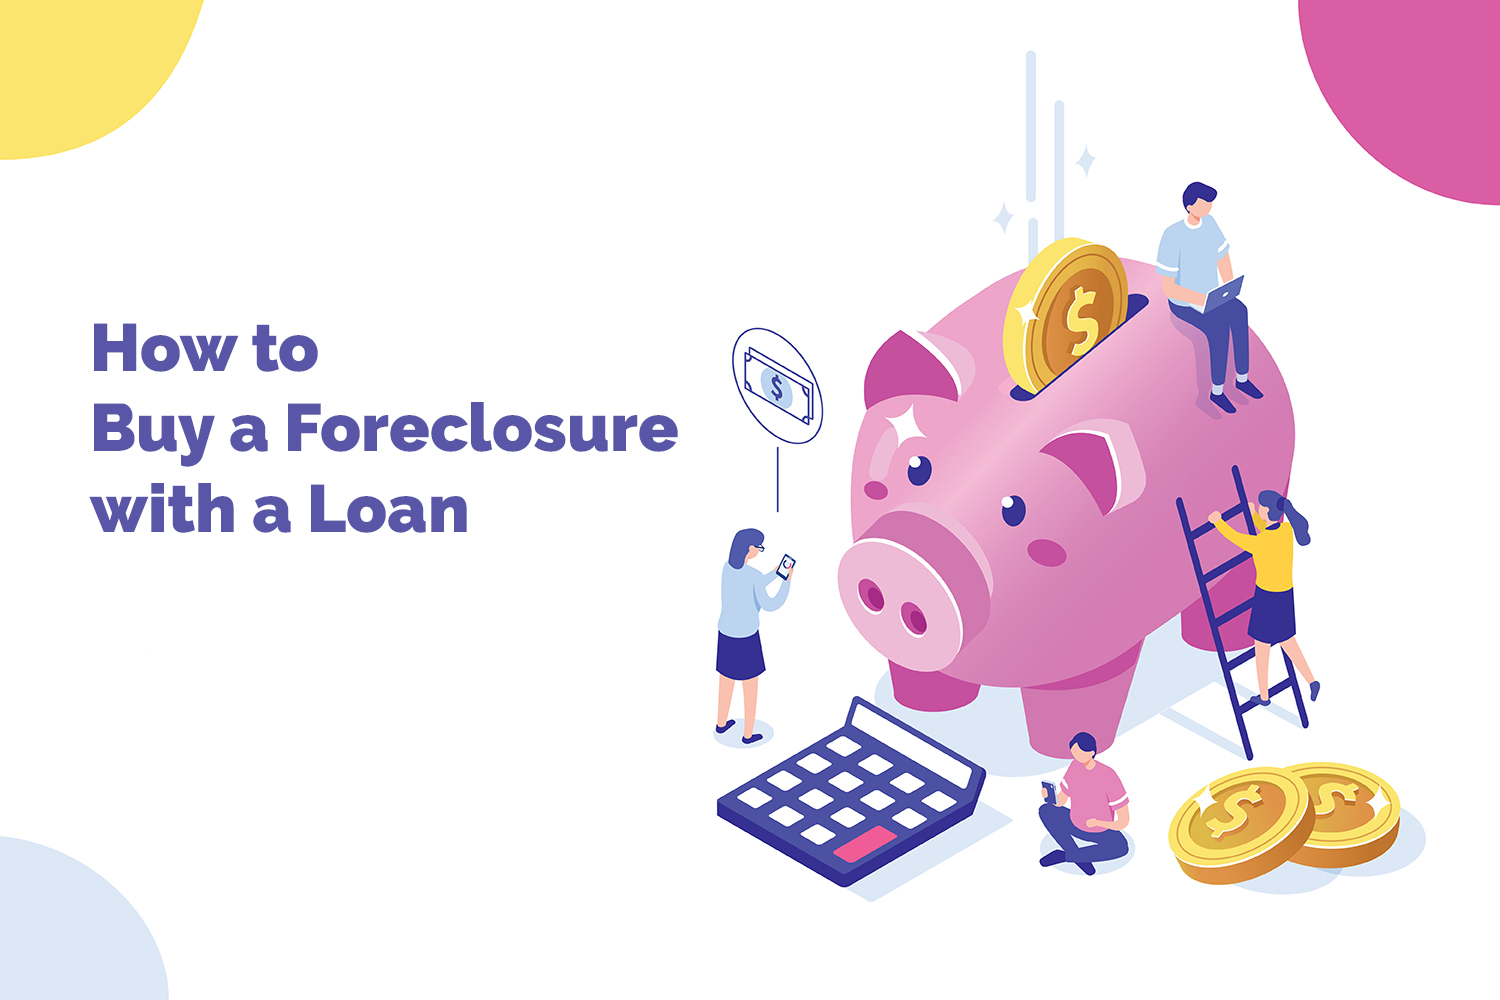 How to Buy a Foreclosure with a Loan